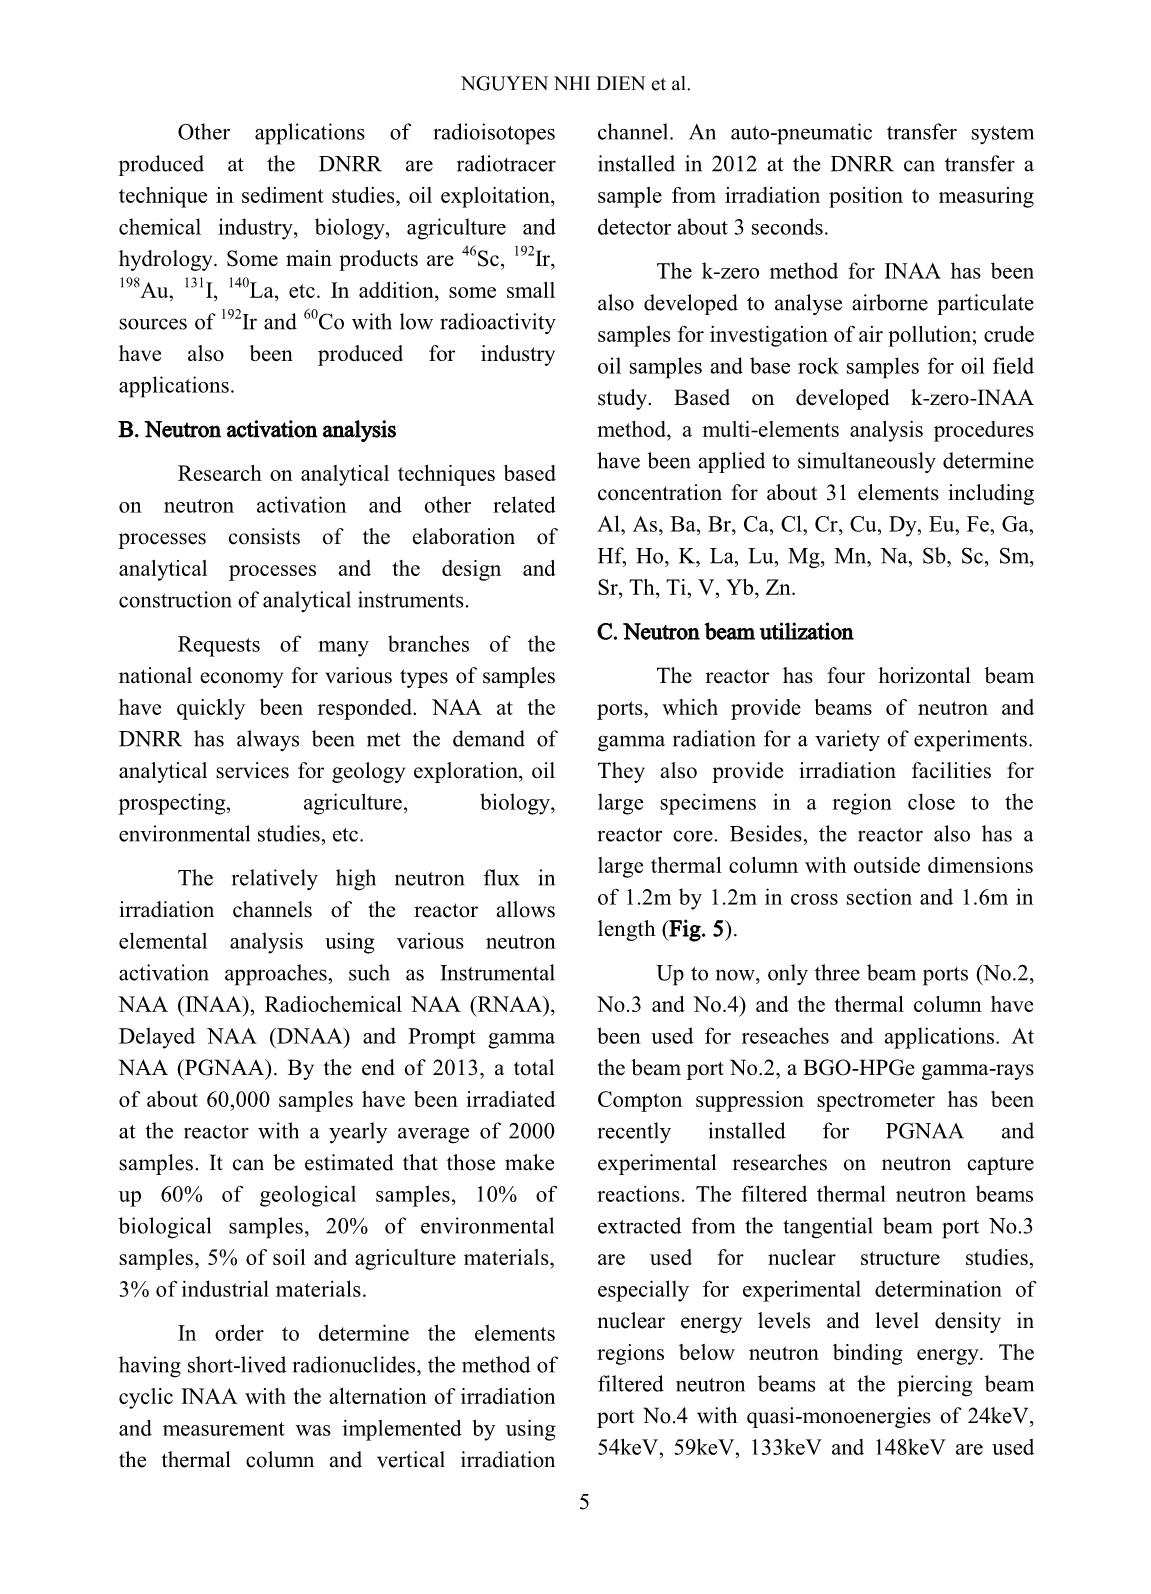 Nuclear Science and Technology - Volume 4, Number 1, March 2014 trang 8